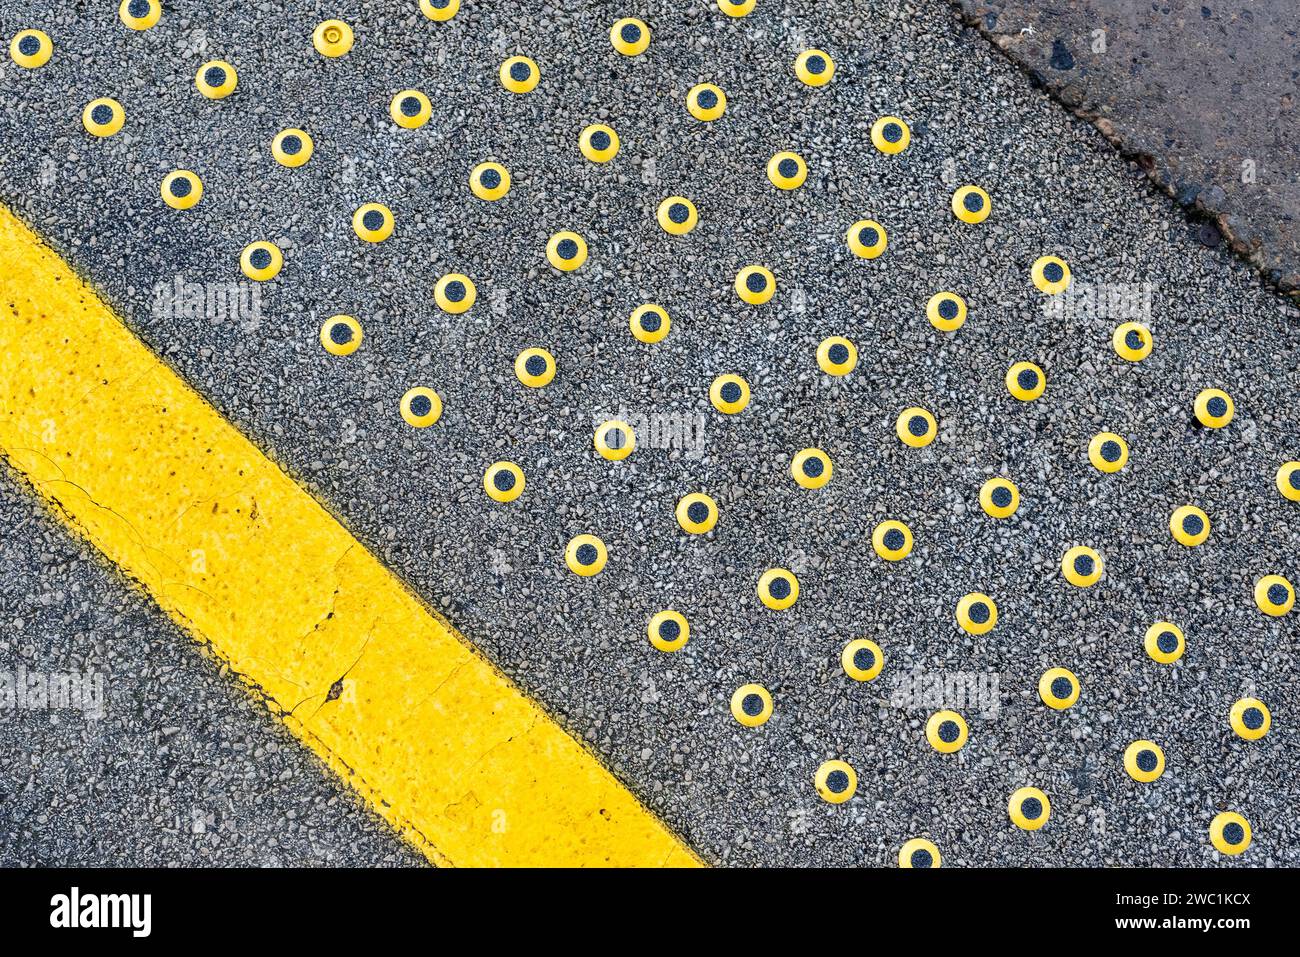 Tactile warning strip, yellow line with black and yellow studs at railway platform edge, United Kingdom Stock Photo